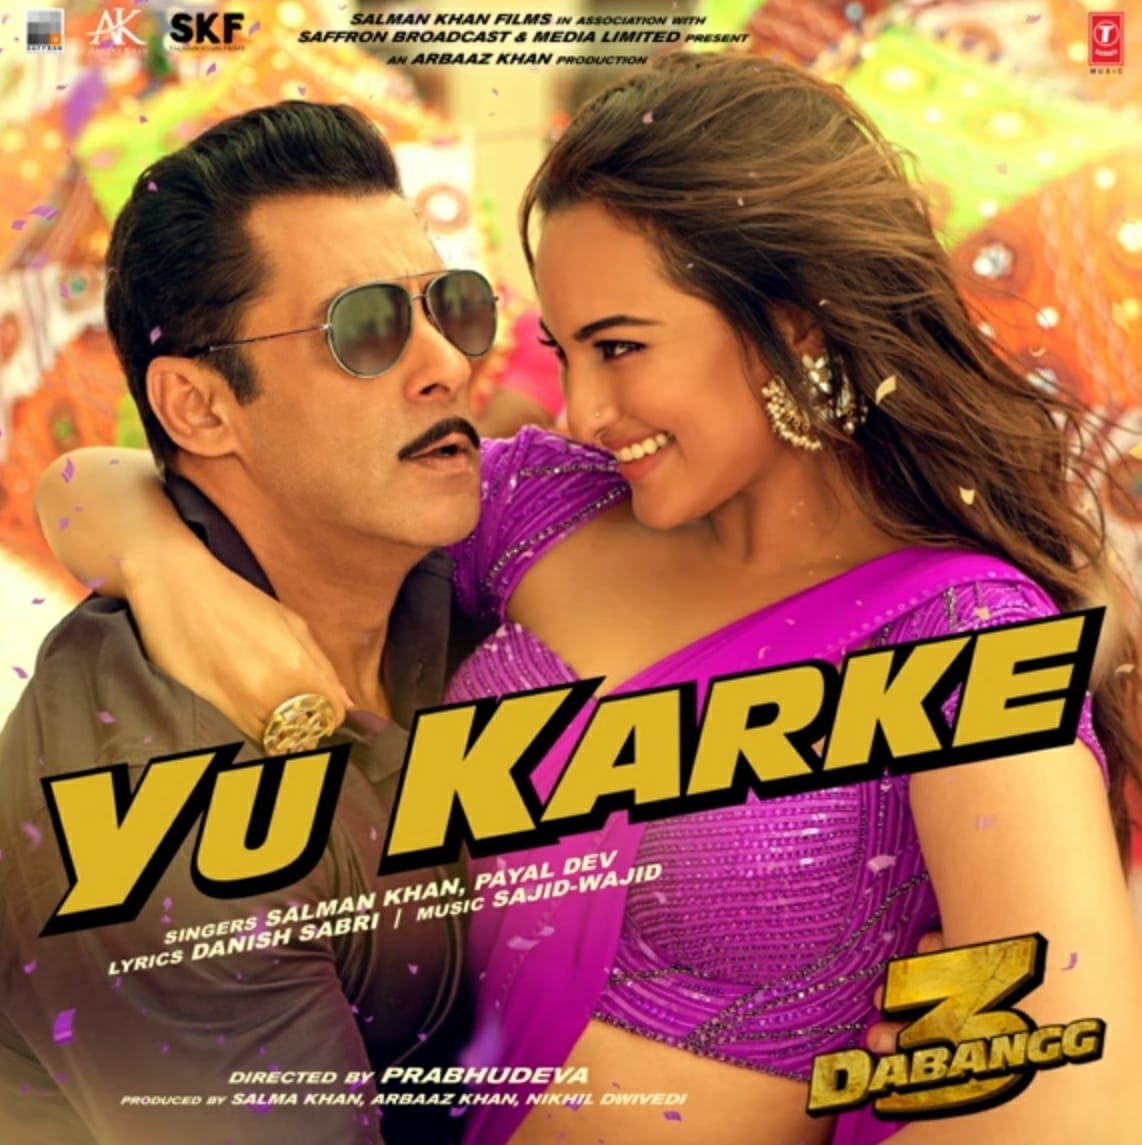 Dabangg 3: Salman Khan's new song, Yu Karke released - The Indian Wire